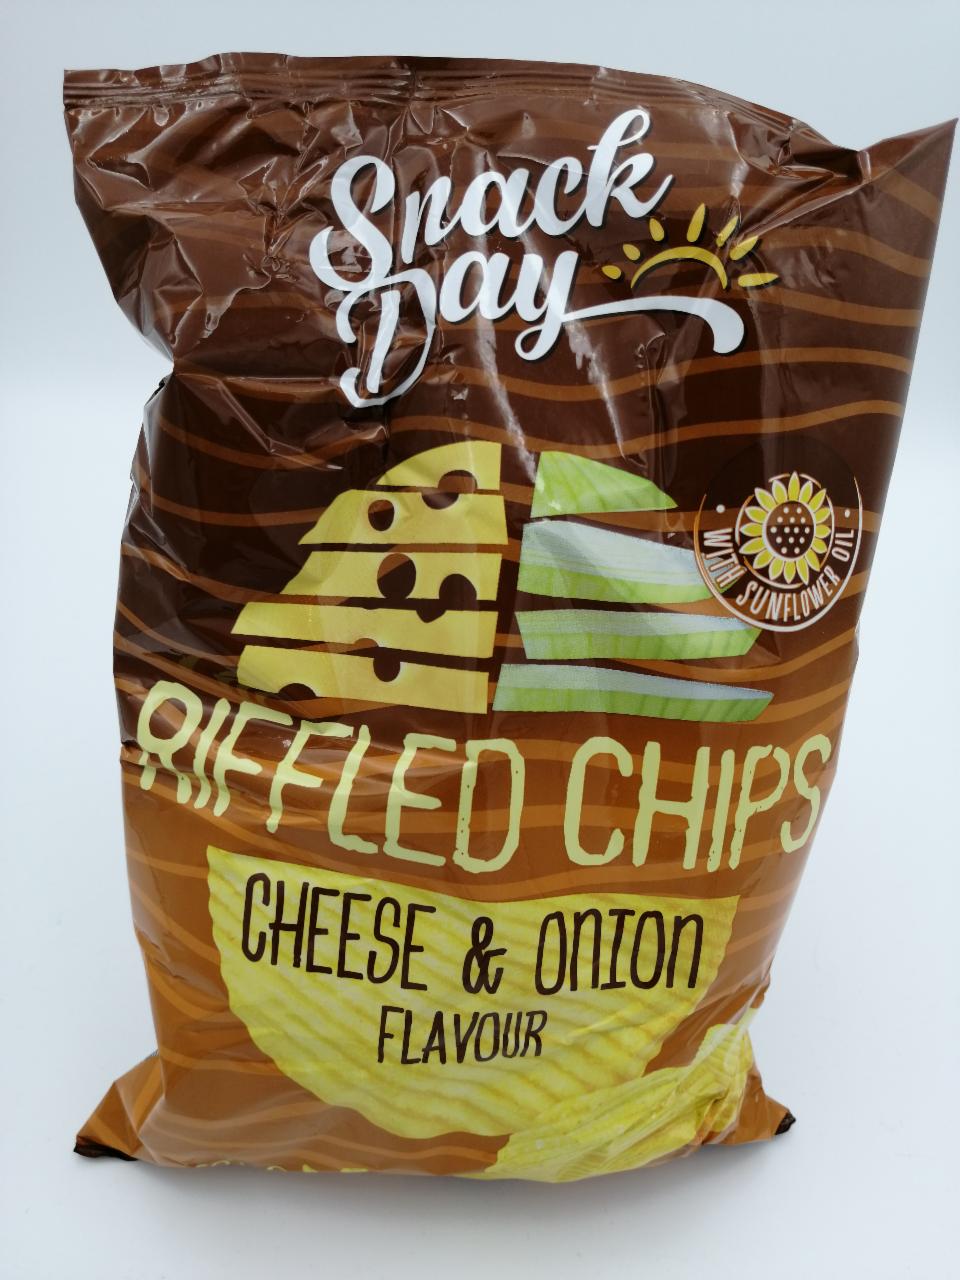 Fotografie - Riffled chips cheese & onion Snack day